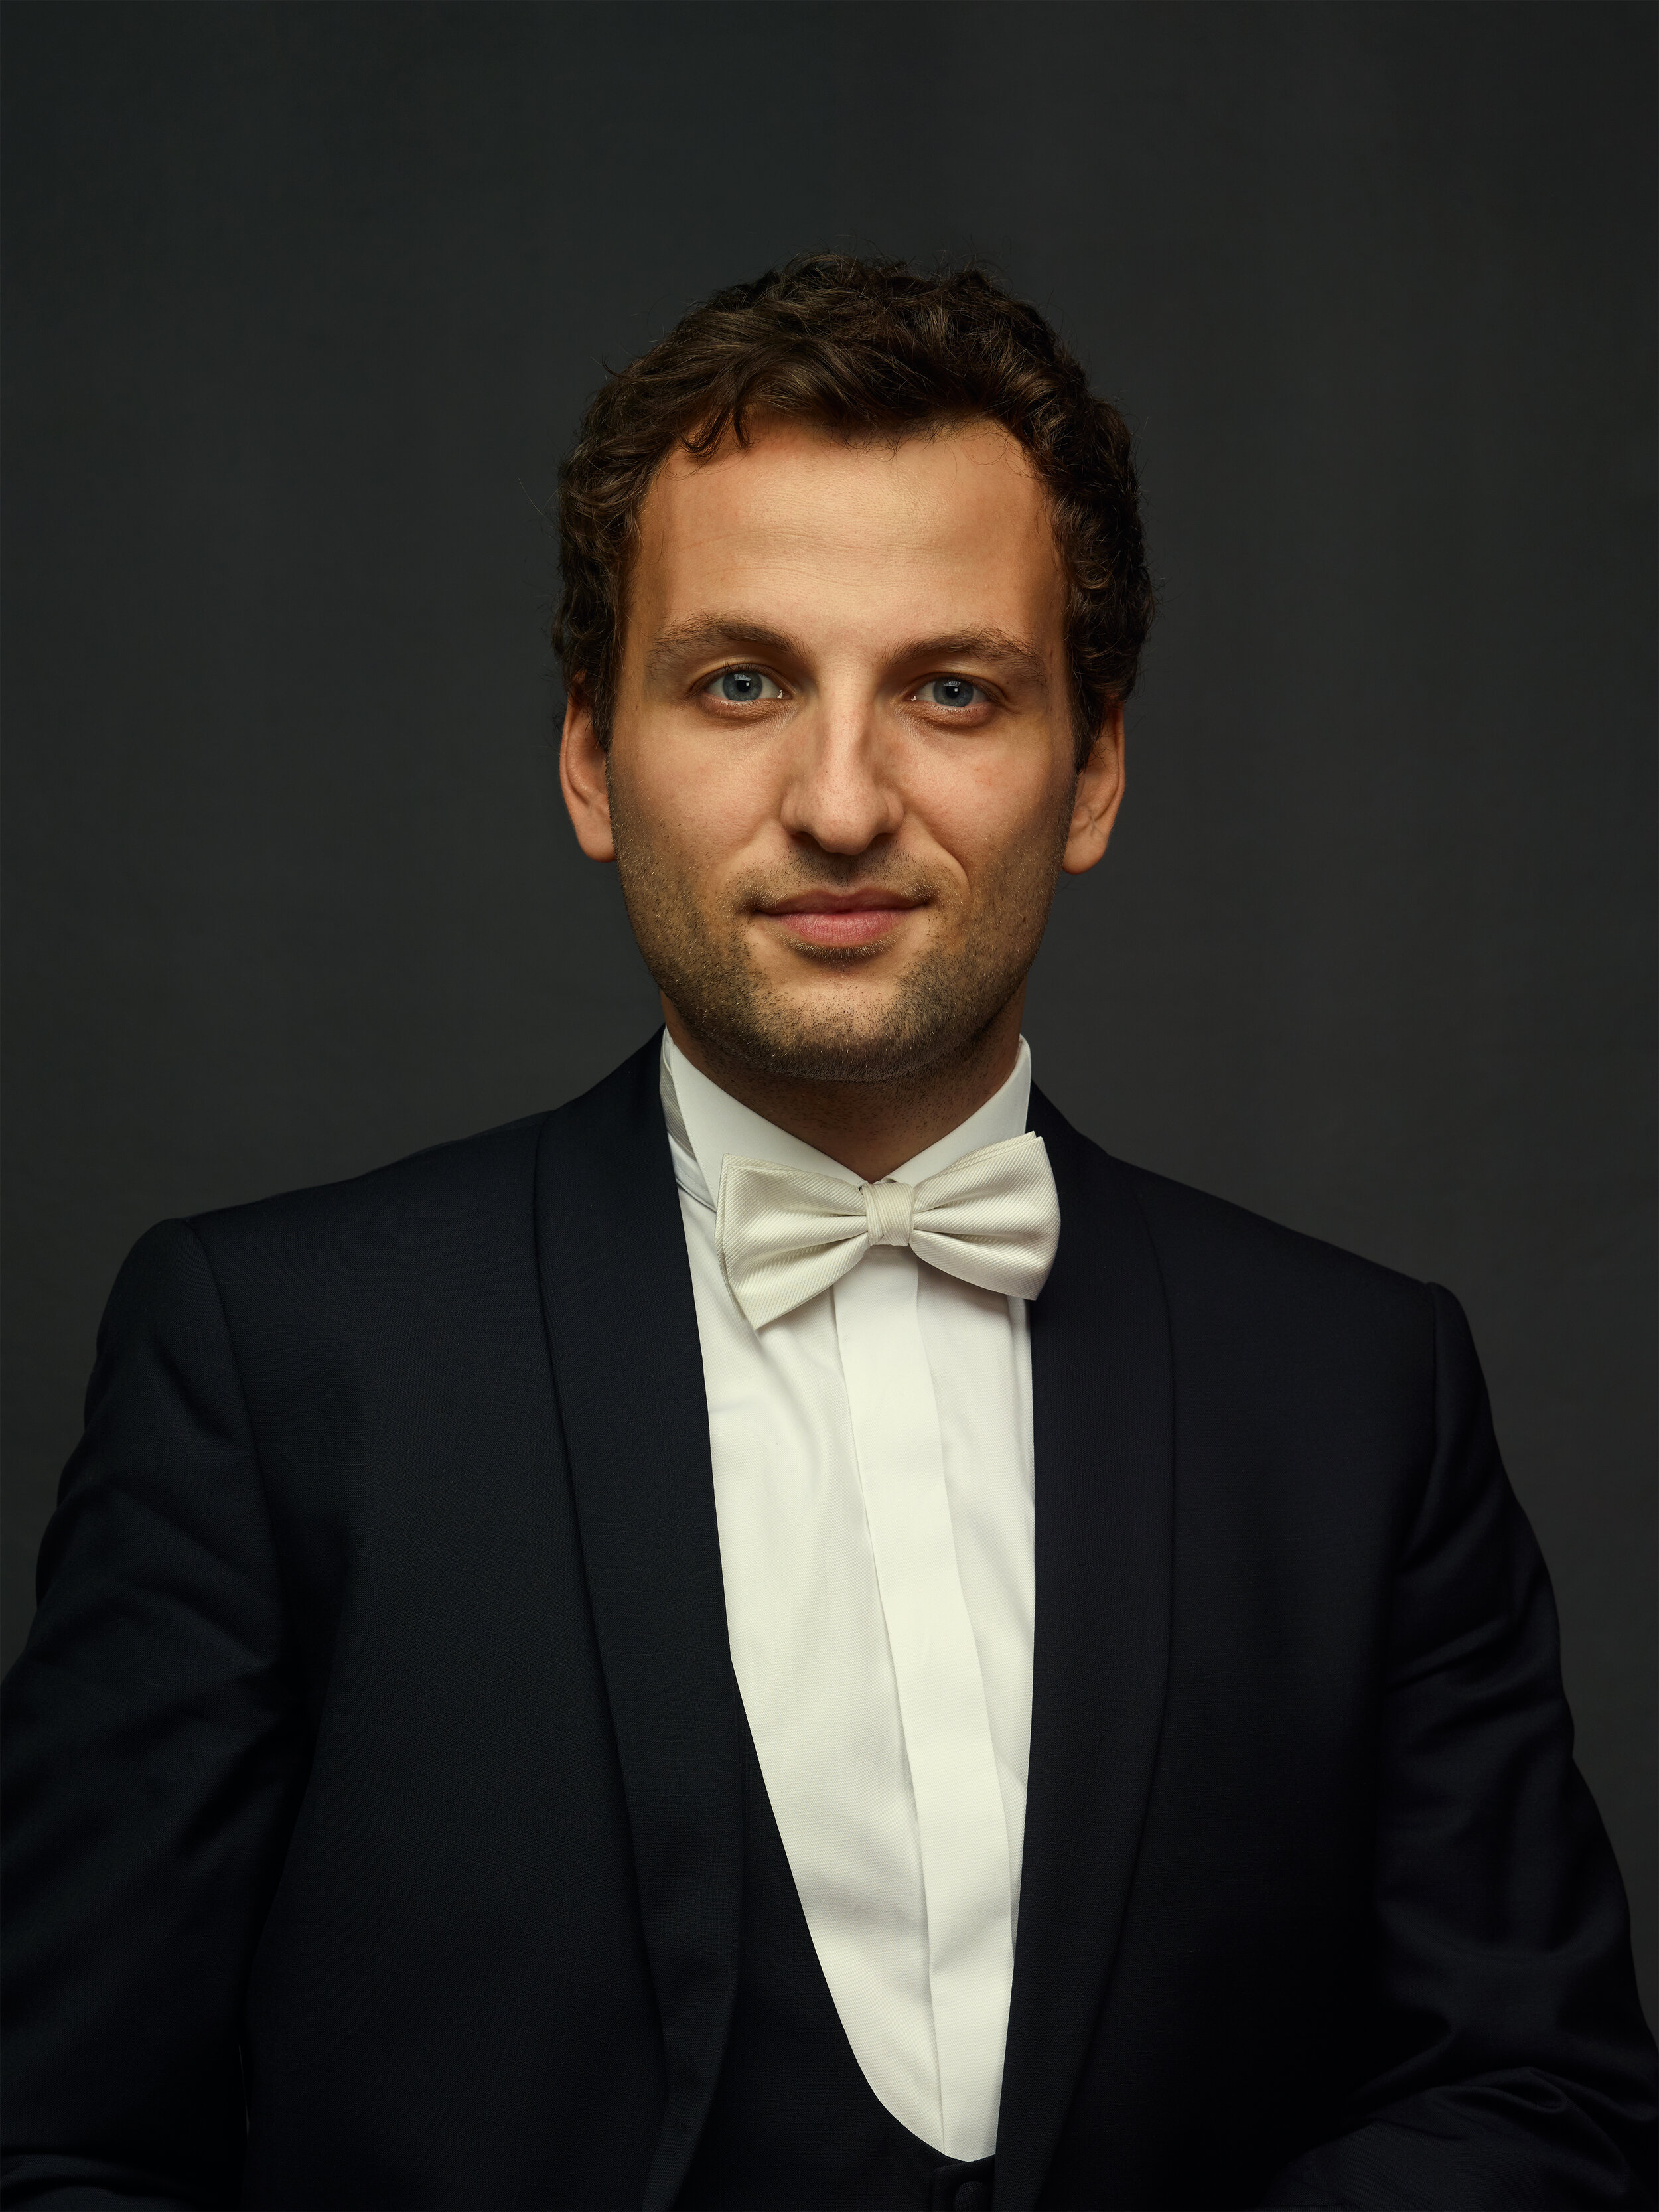 VICTOR JACOB, CONDUCTOR